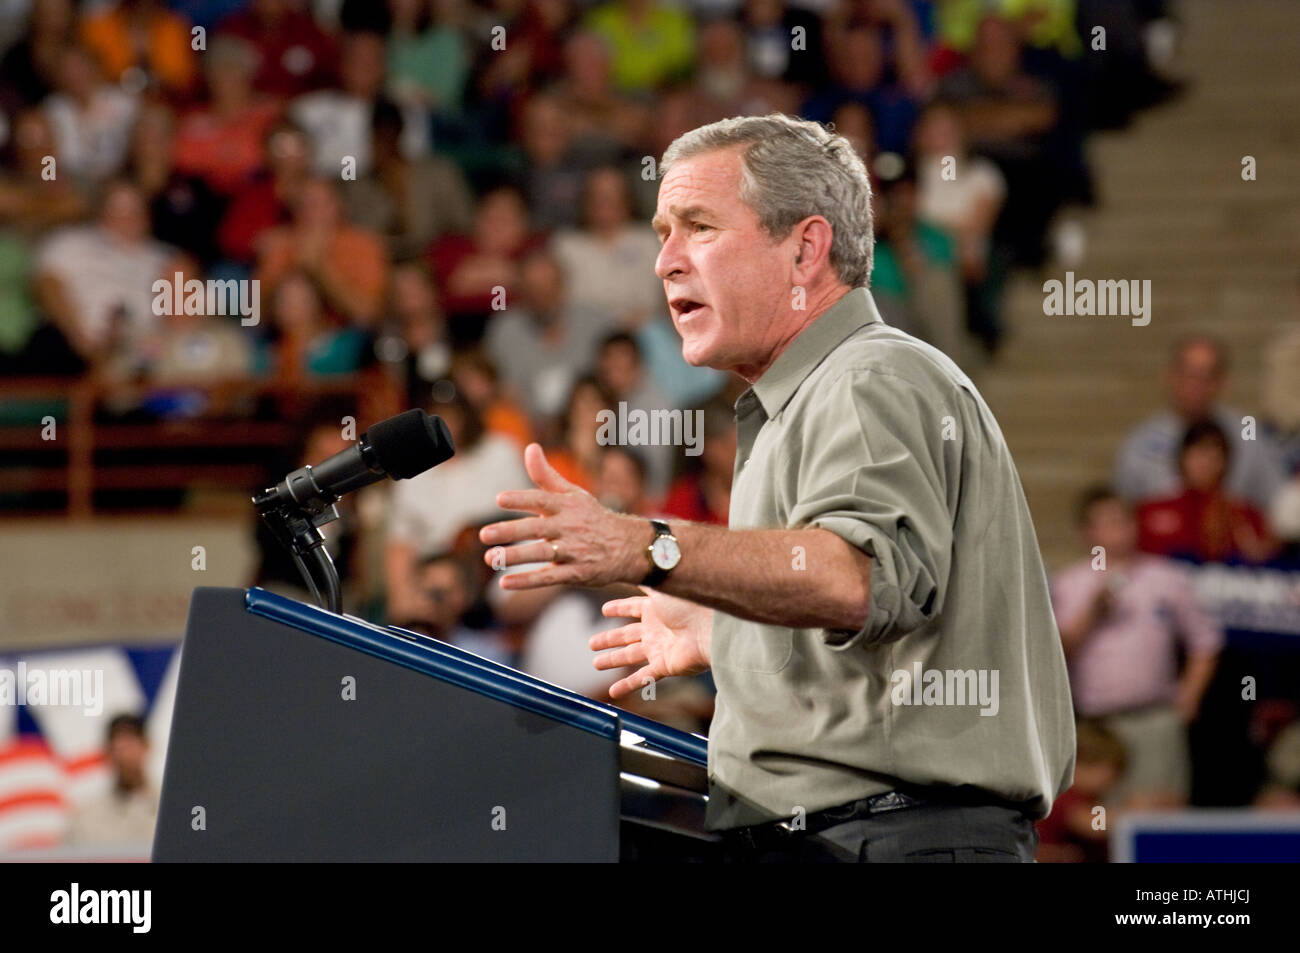 US President George W Bush addresses the crowd at a rally for Republican candidates Stock Photo